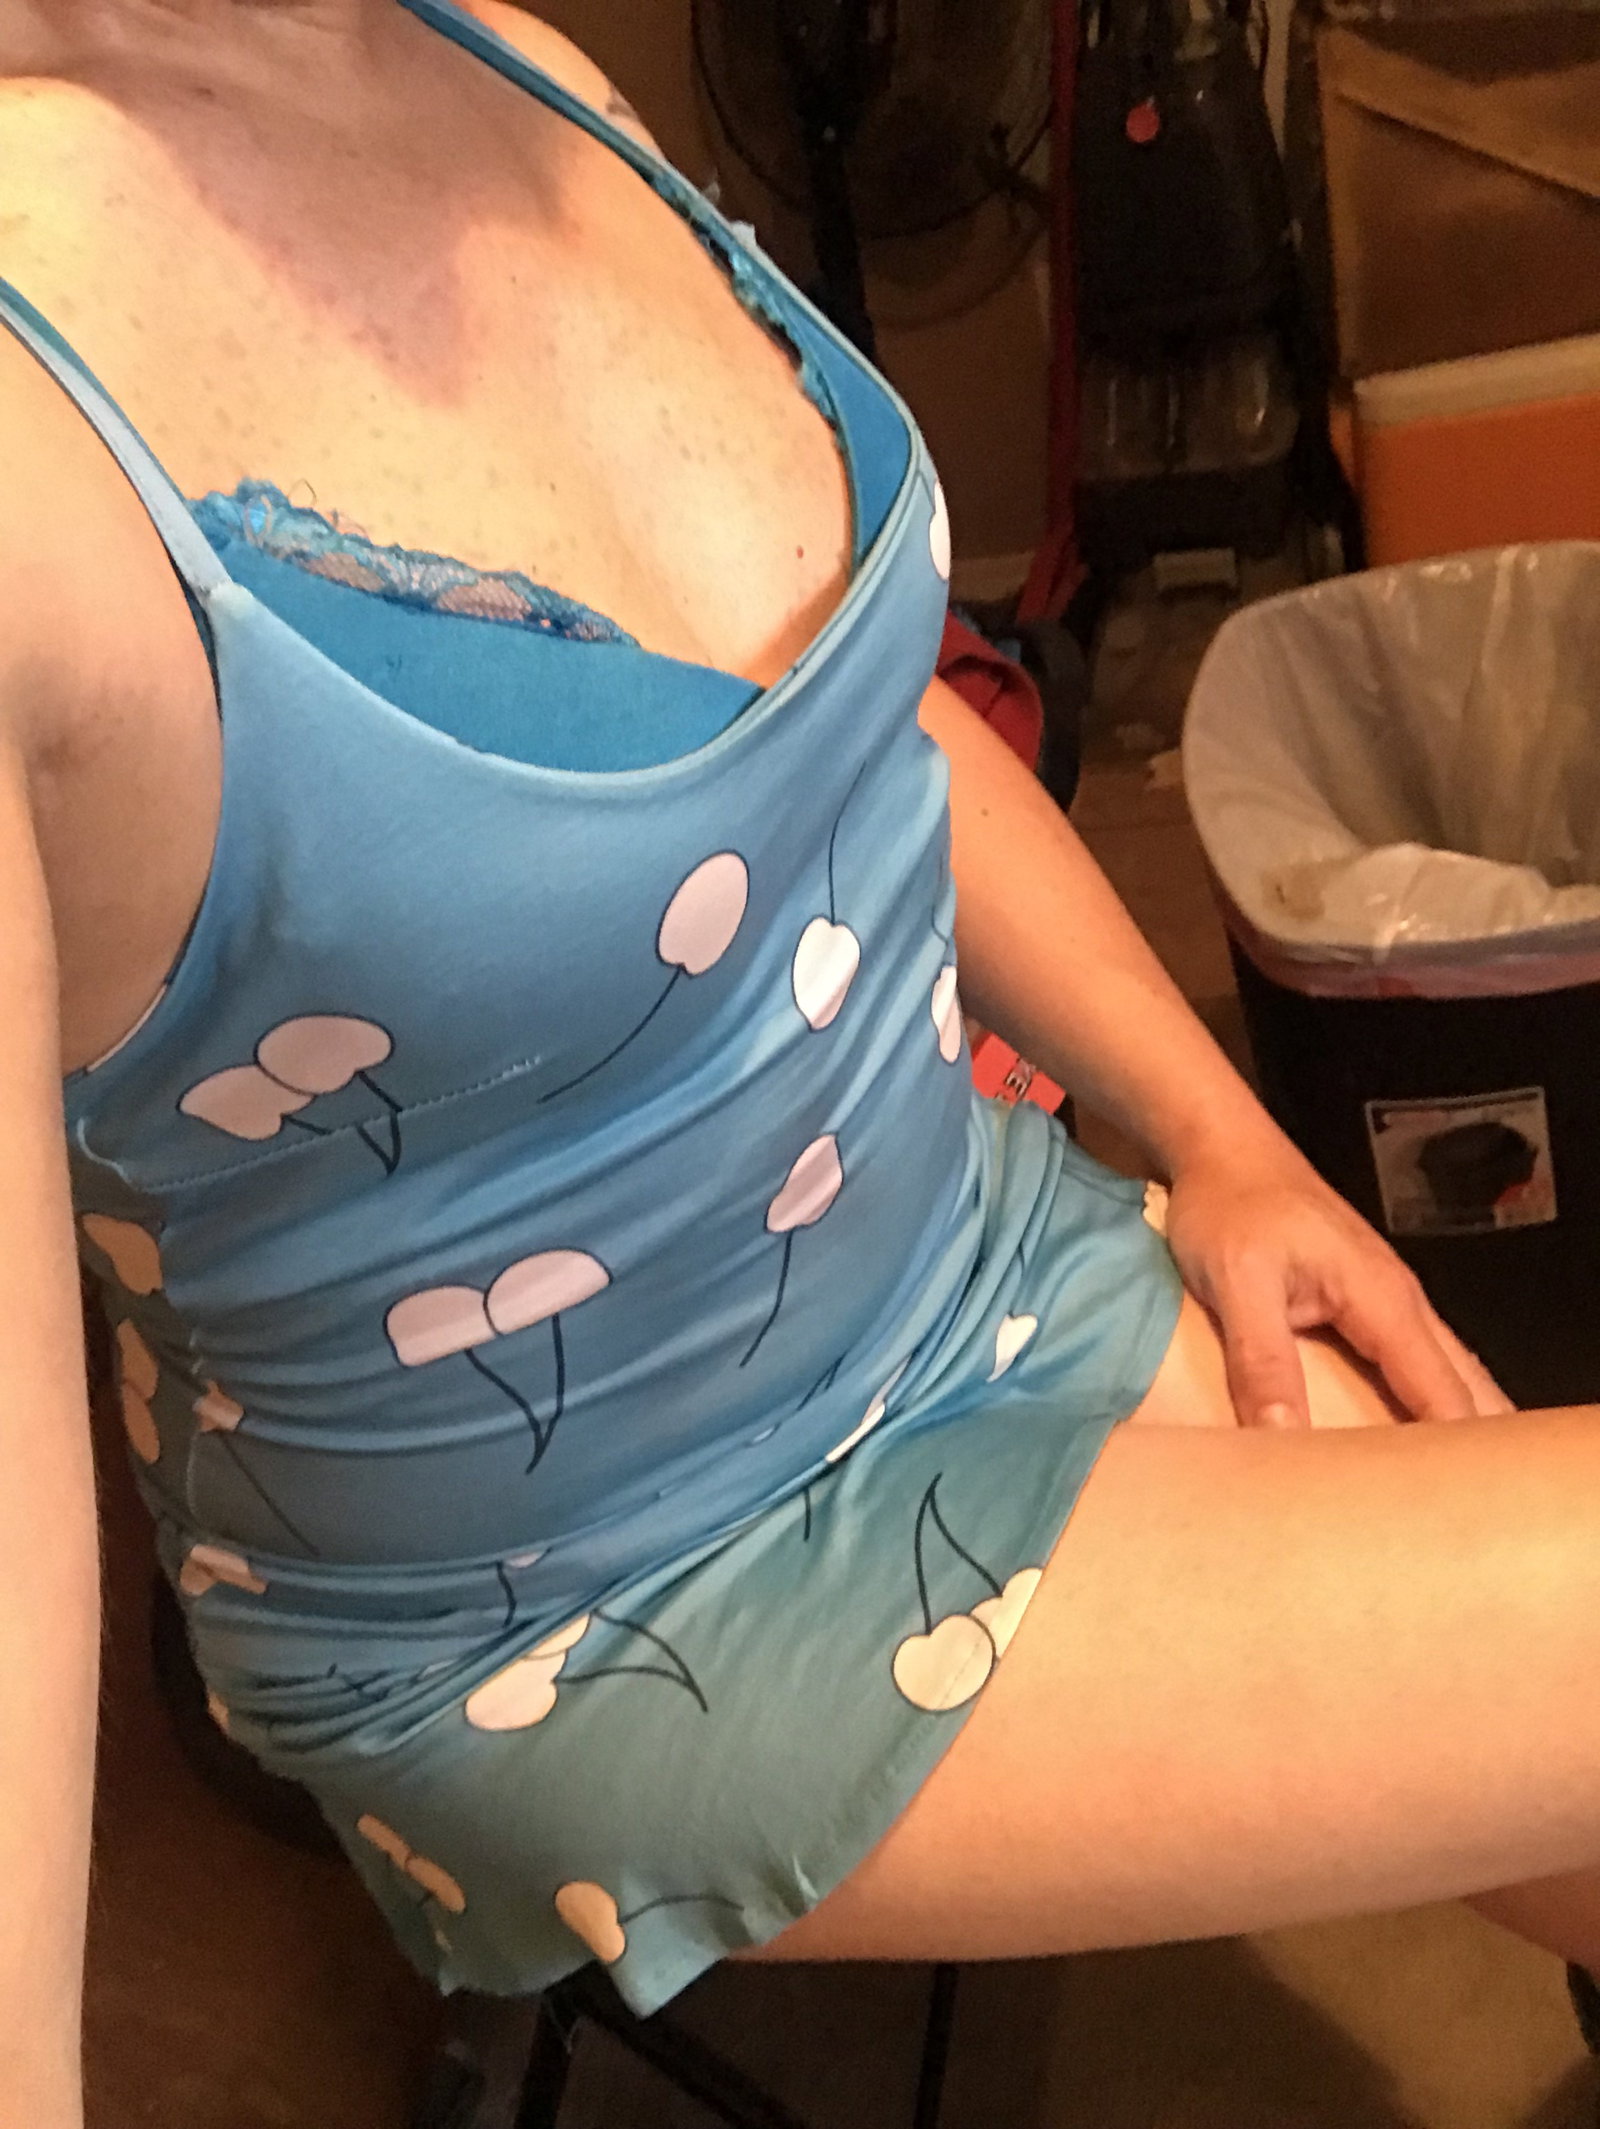 Watch the Photo by Sissybottomslut with the username @Sissybottomslut, posted on December 6, 2019